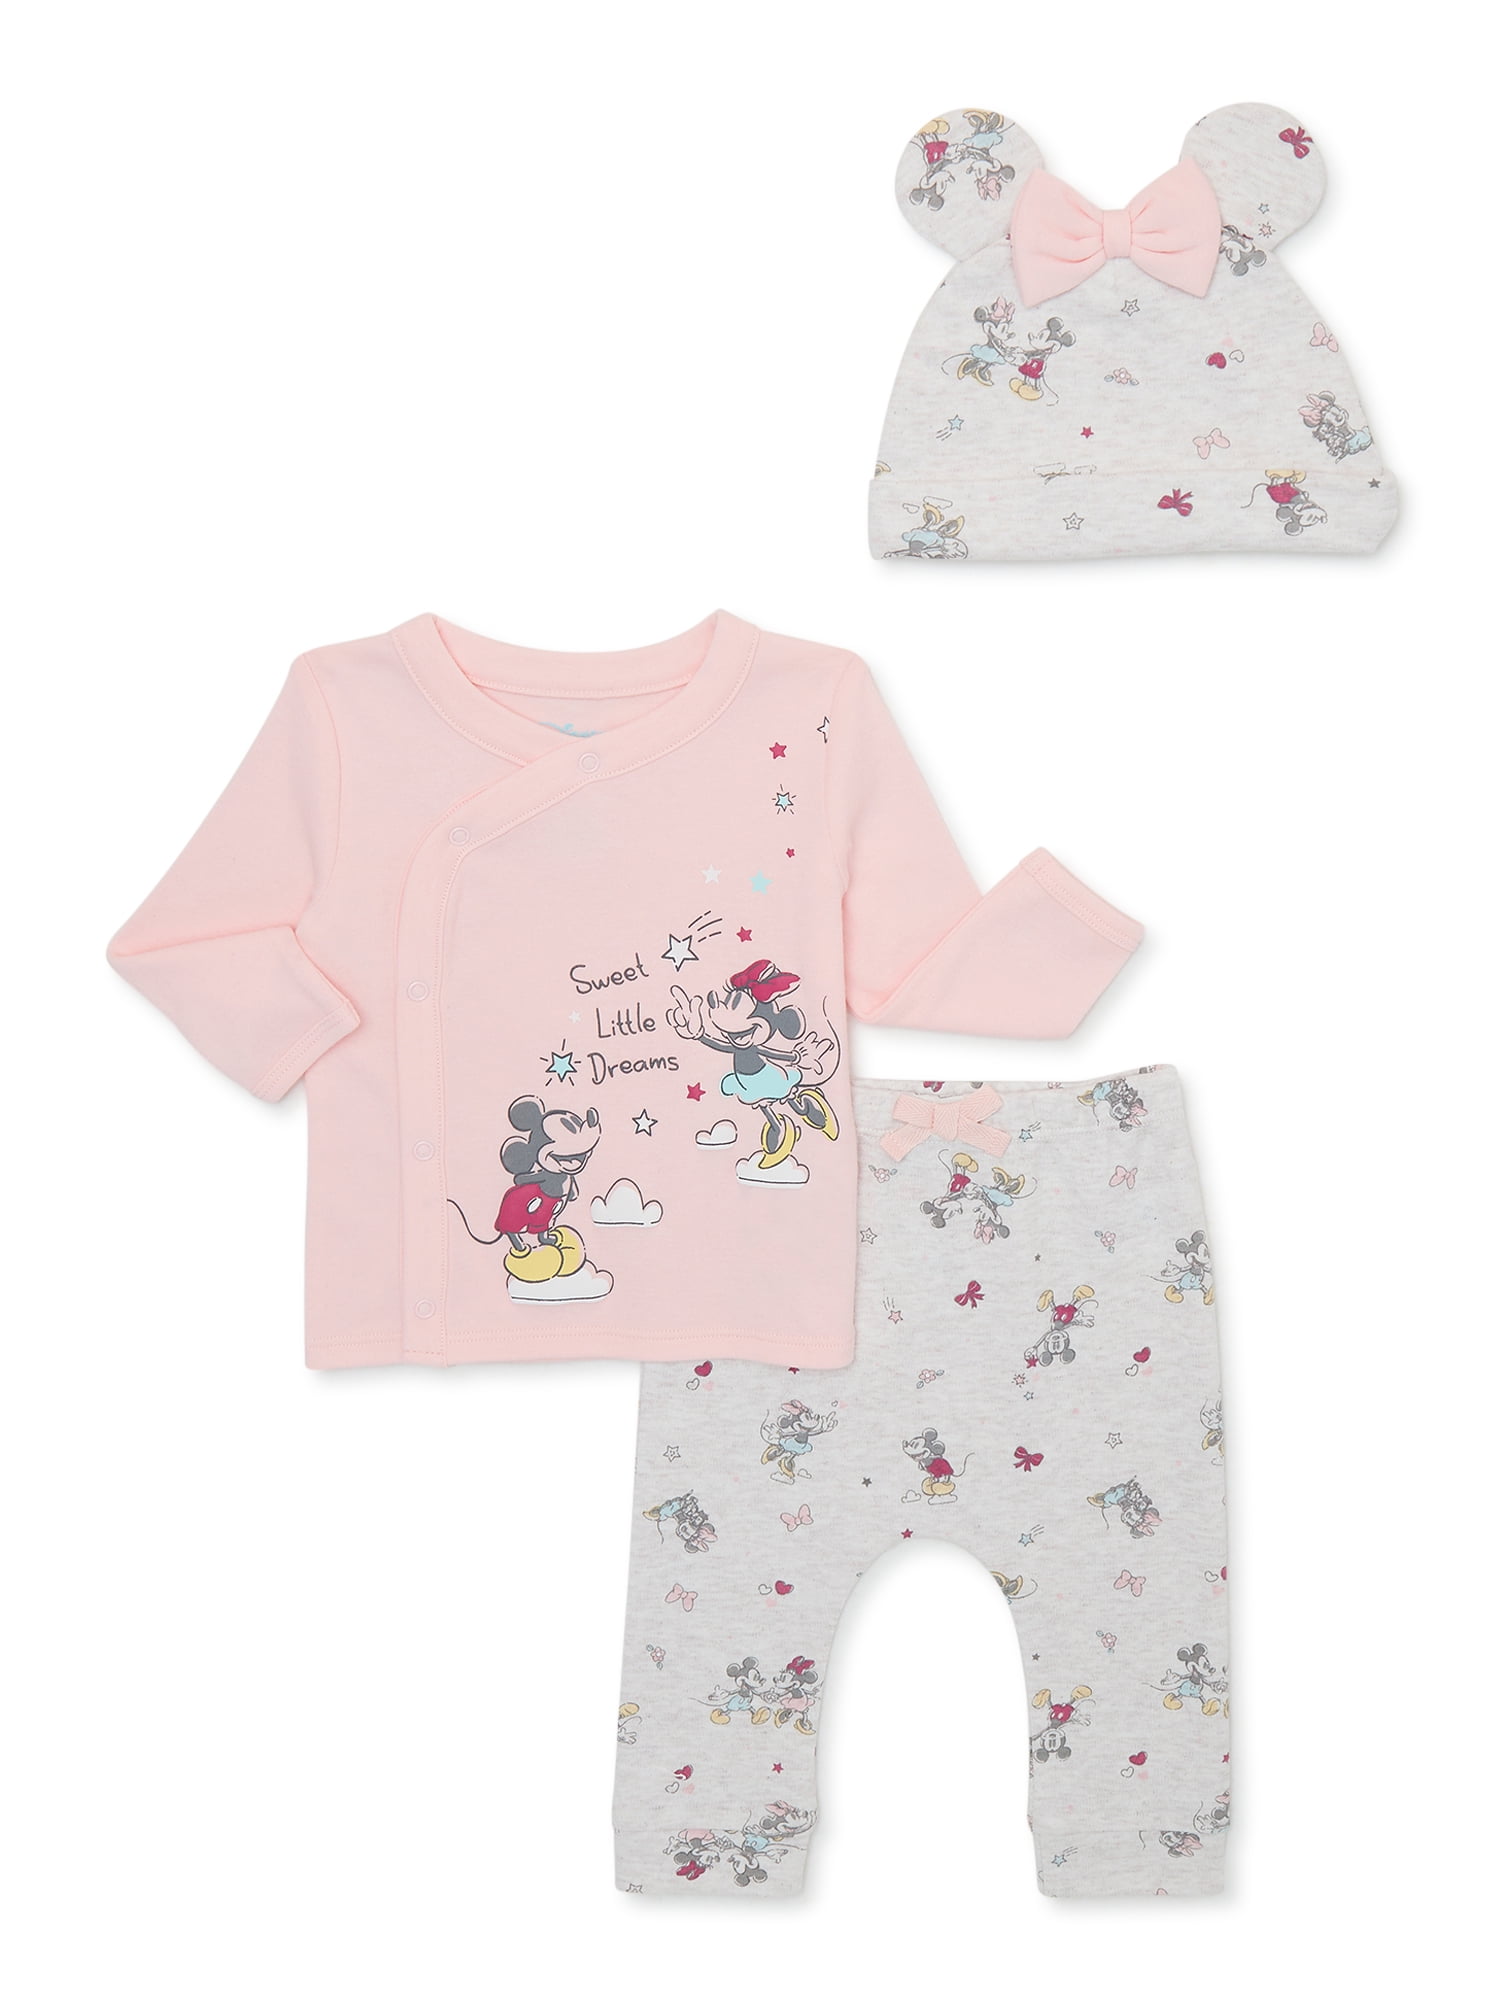 Disney Baby Wishes + Dreams Minnie Mouse Baby Boys and Girls Unisex Take Me Home Set, 3-Piece, Sizes 0-6 Months